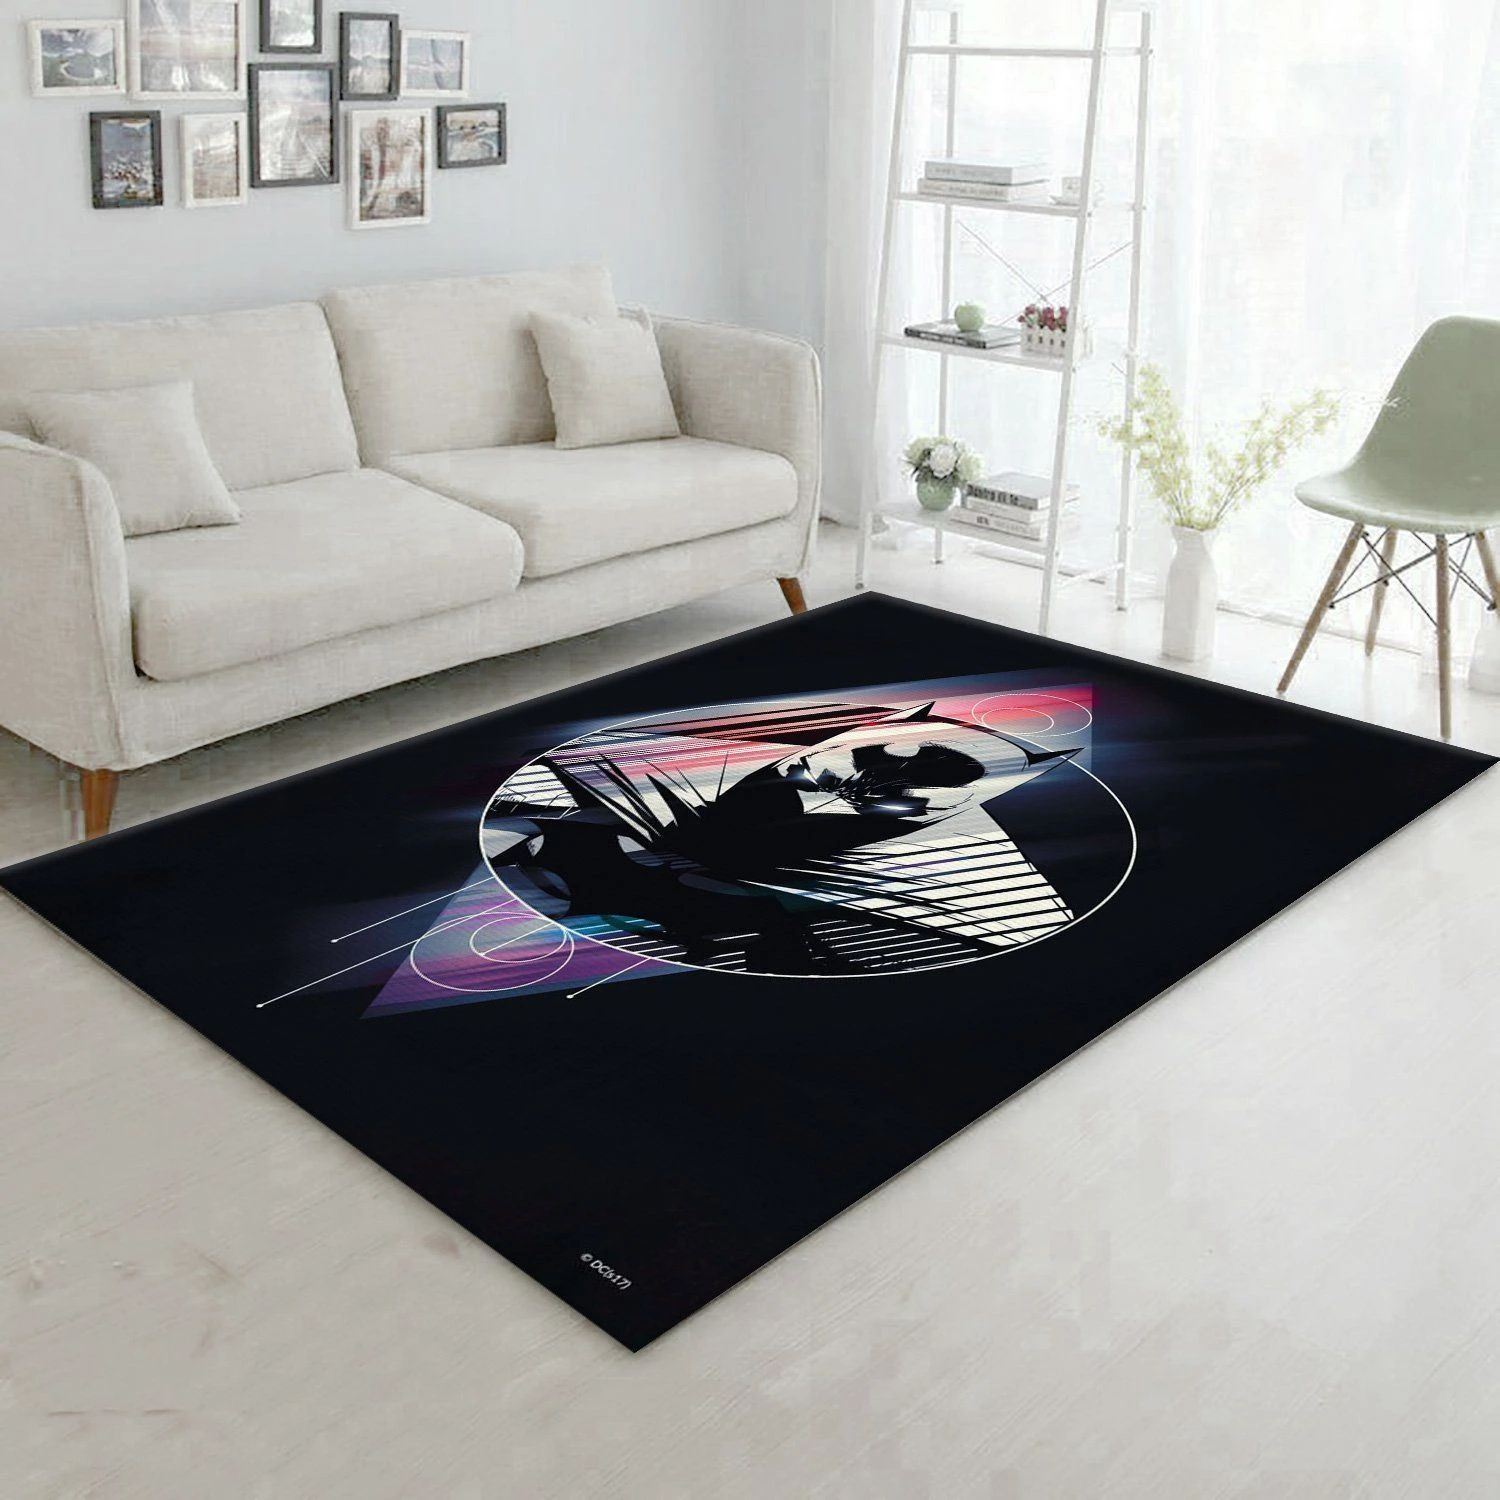 Full Moon Movie Area Rug, Living room and bedroom Rug, US Gift Decor - Indoor Outdoor Rugs